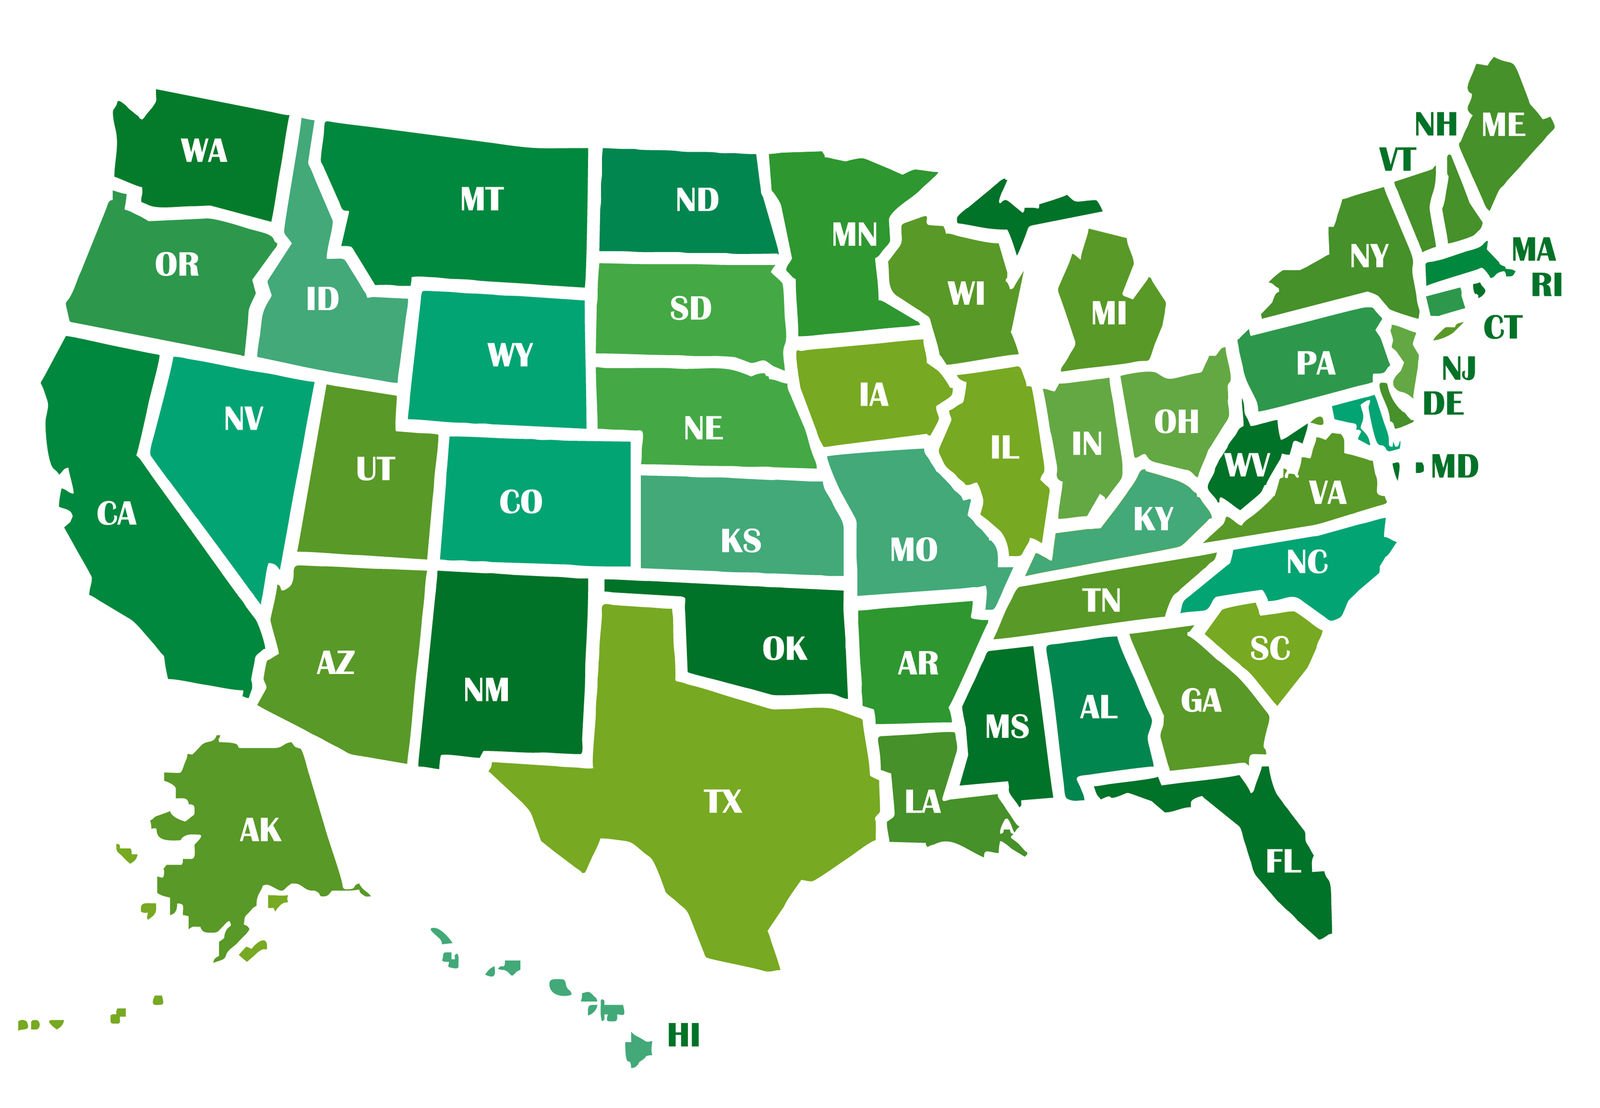 How do you find car insurance coverage requirements in your state?